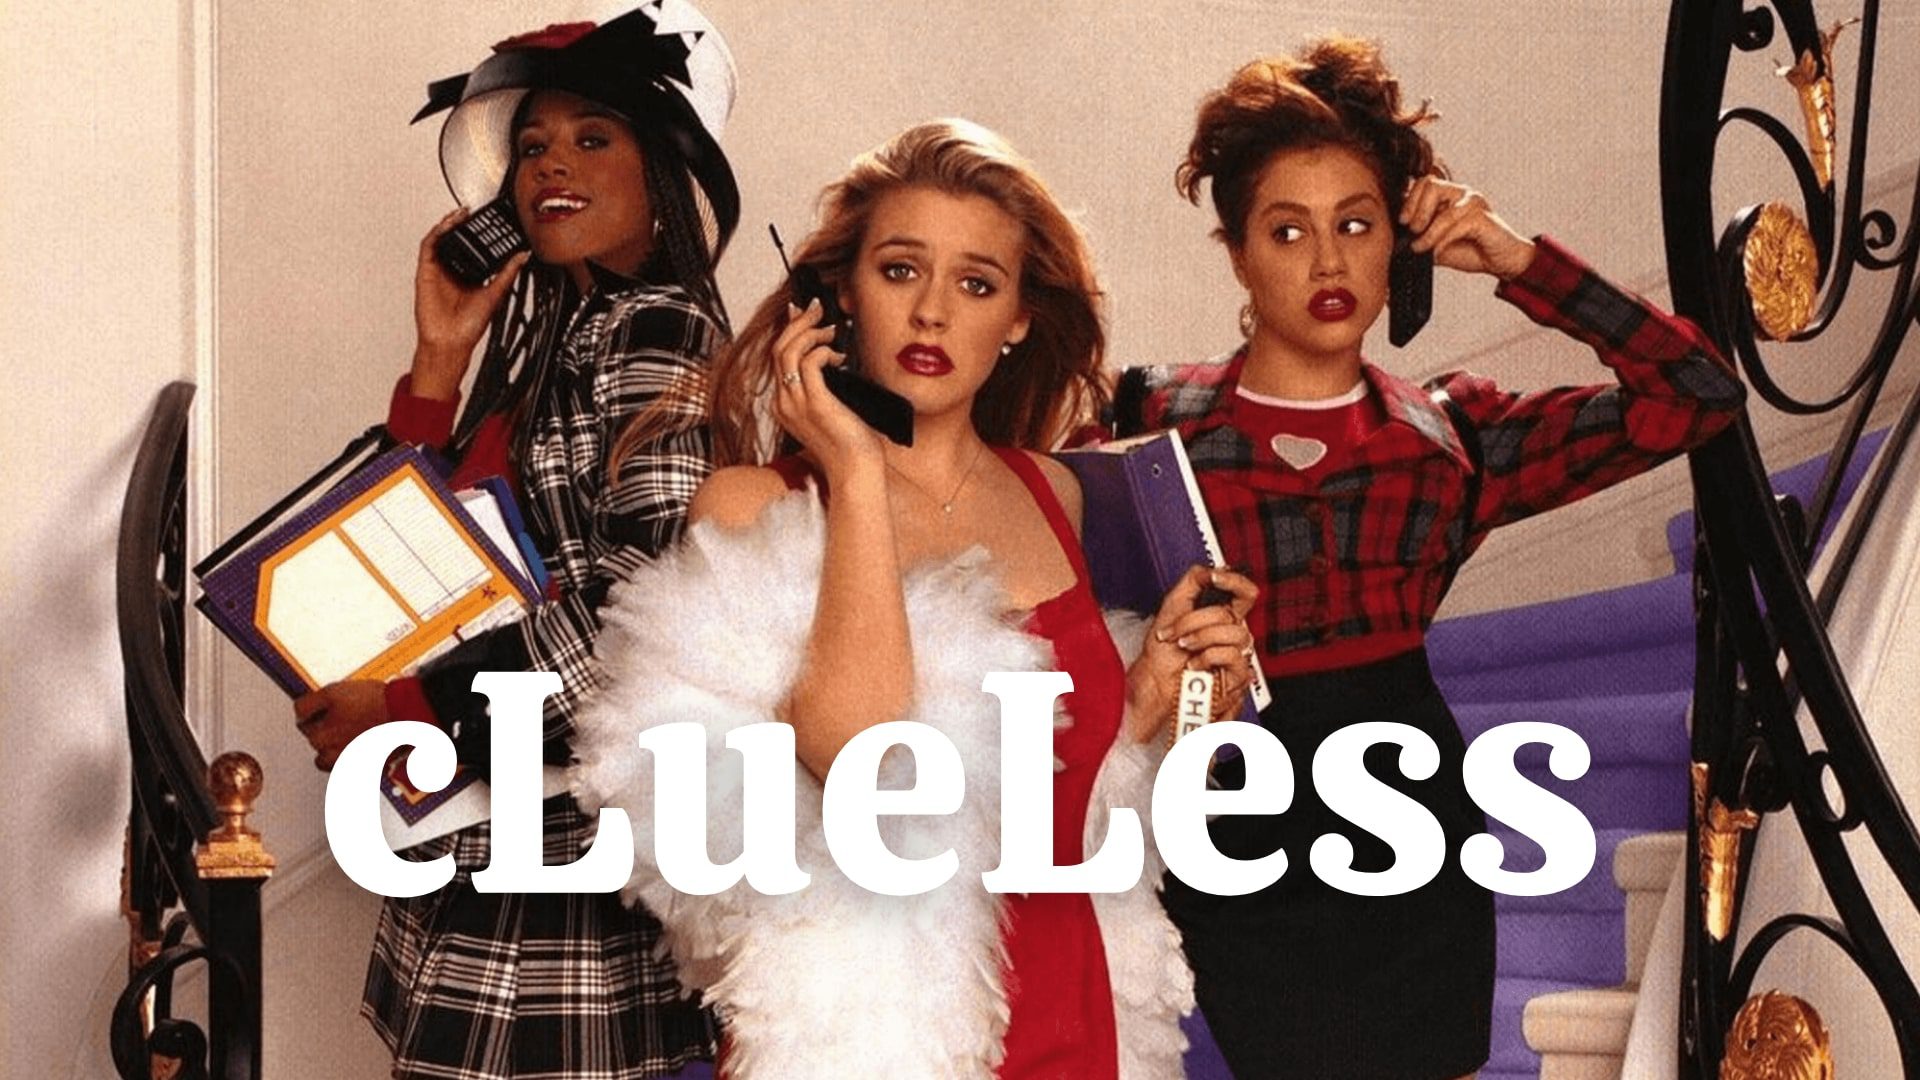 Who Does Cher End Up With In Clueless?